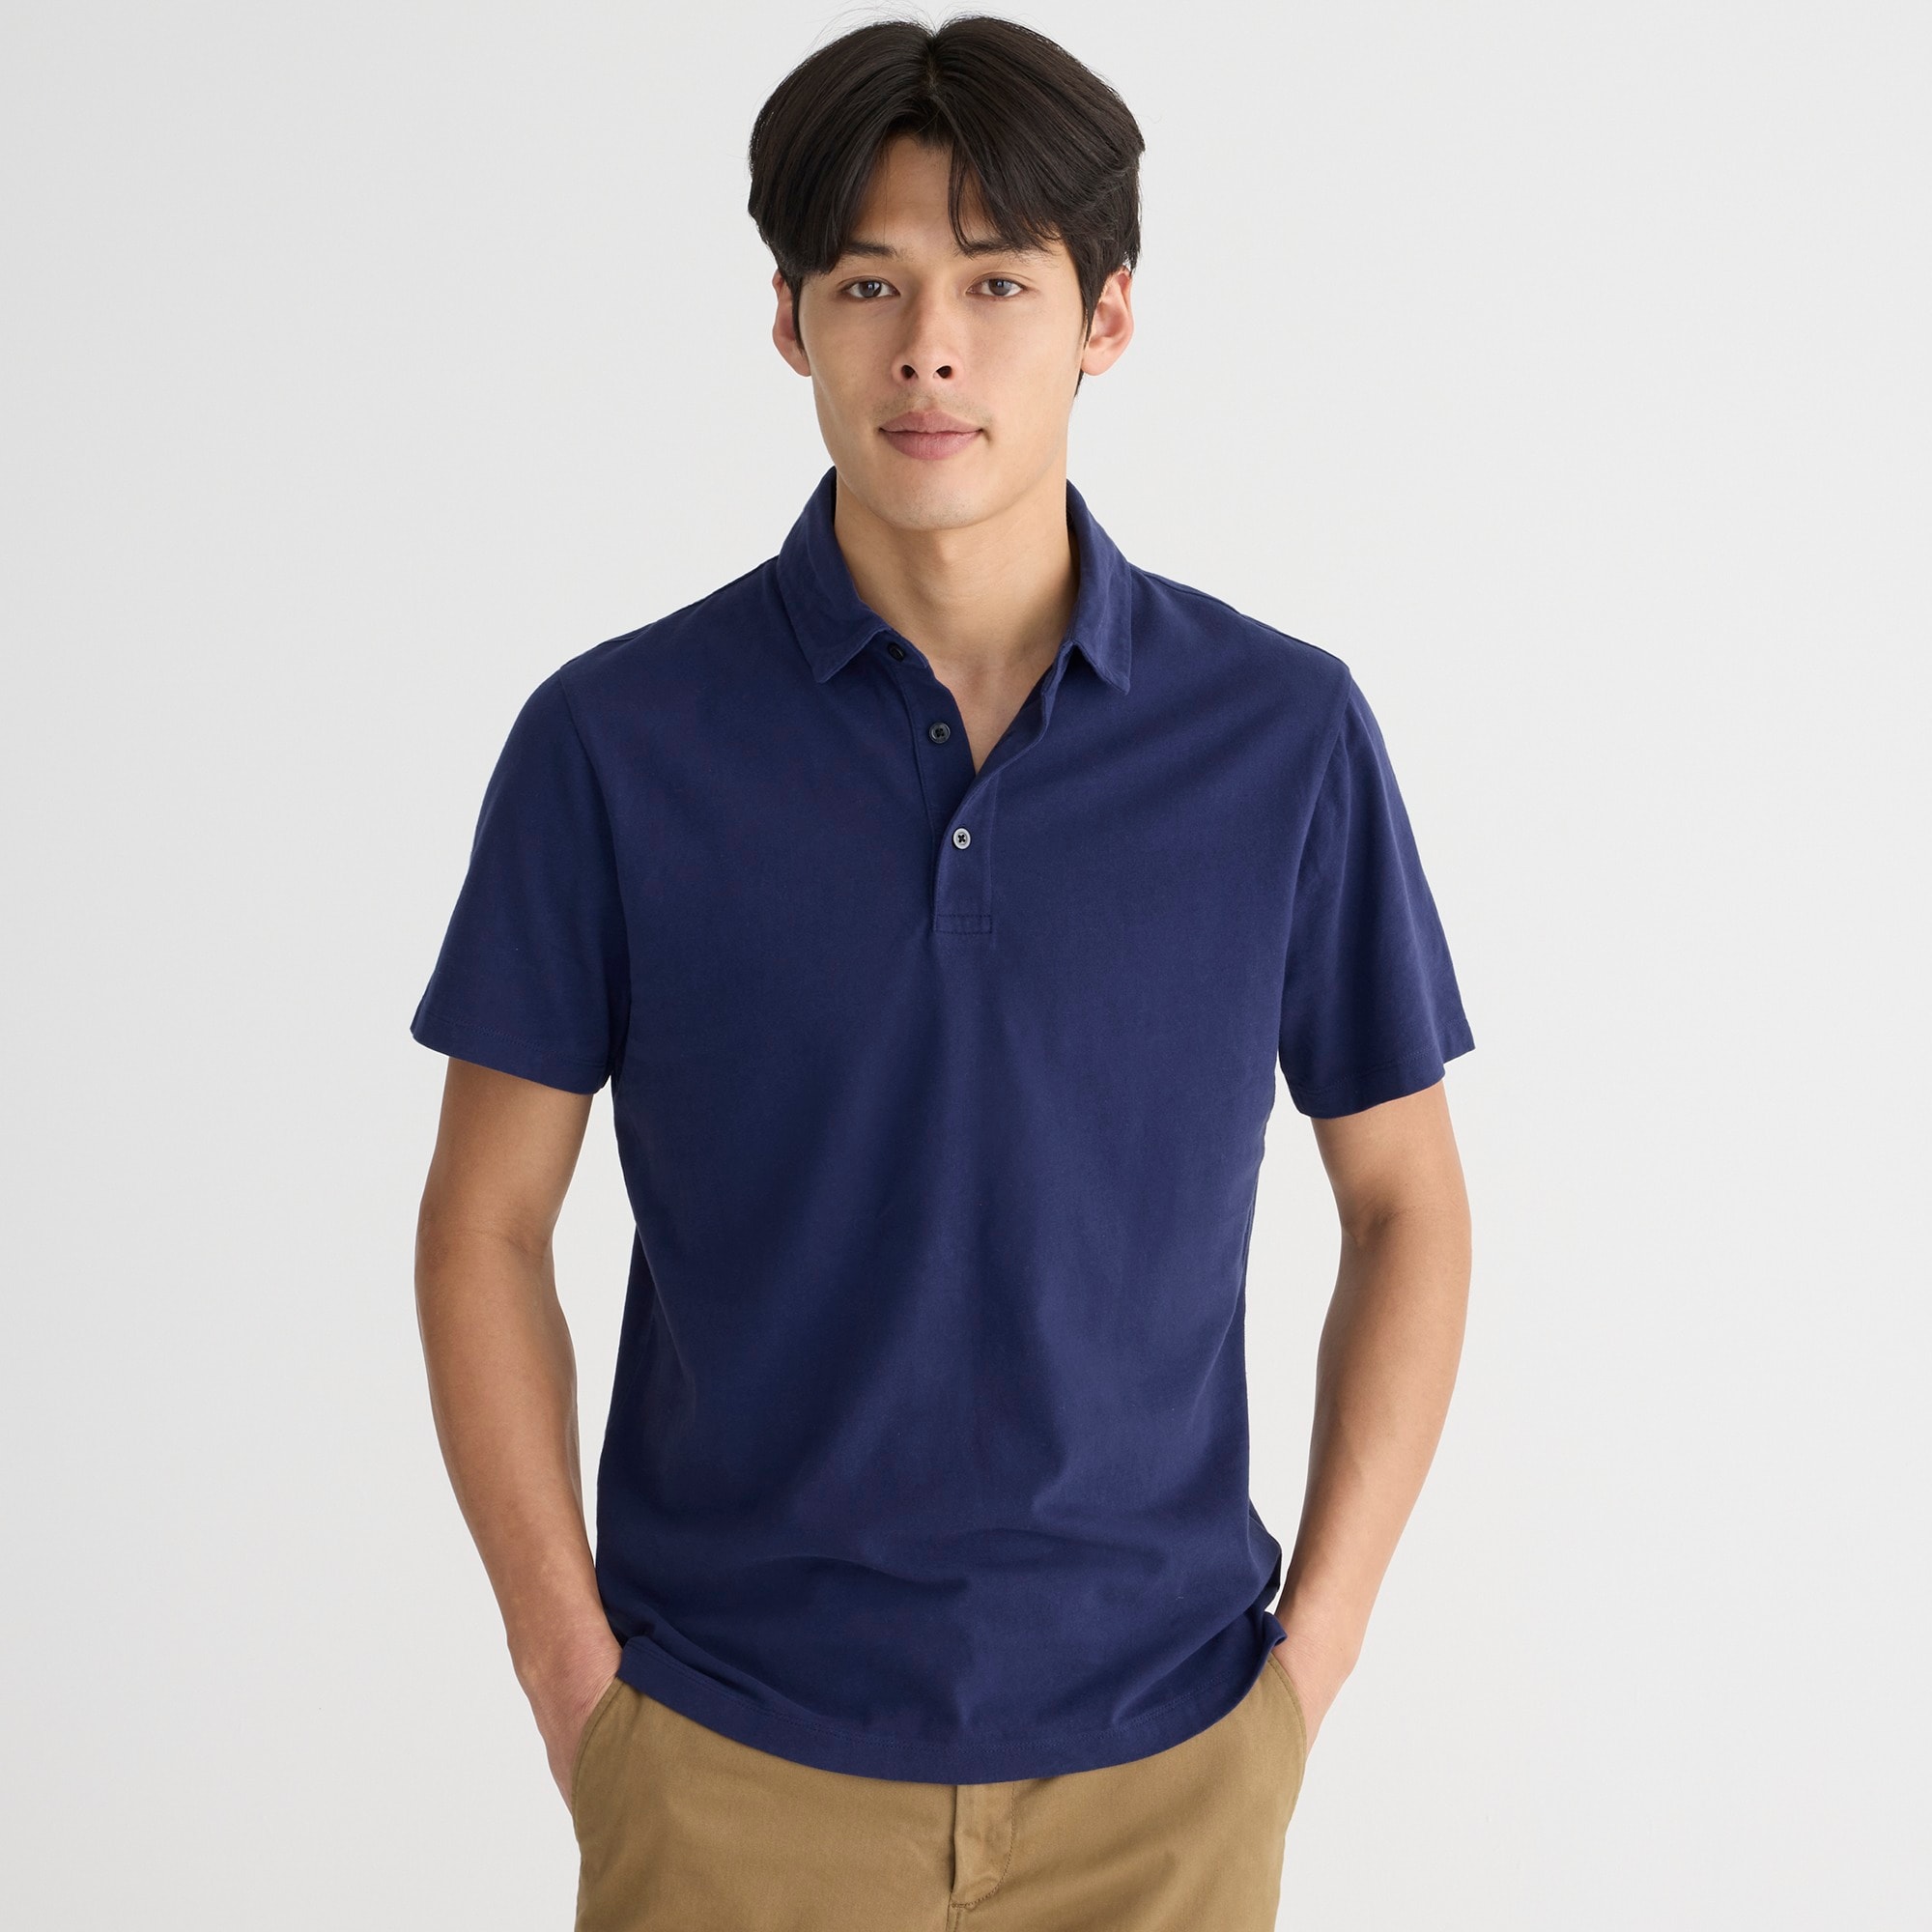 mens Classic Untucked sueded cotton polo shirt